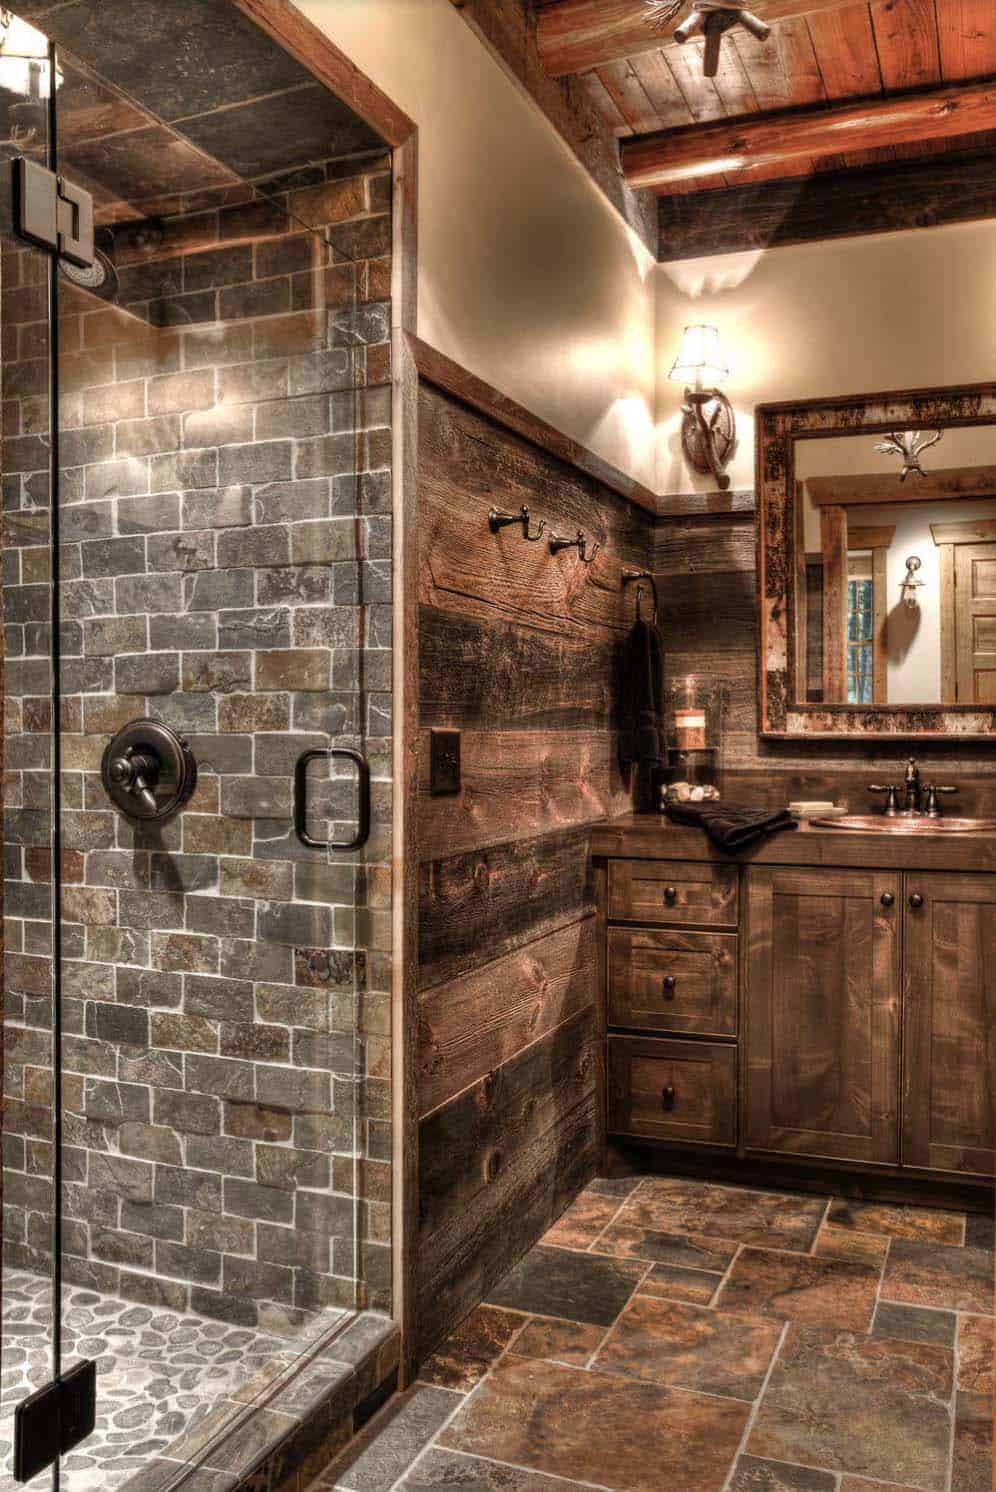 Rustic bathroom with an earthy color palette